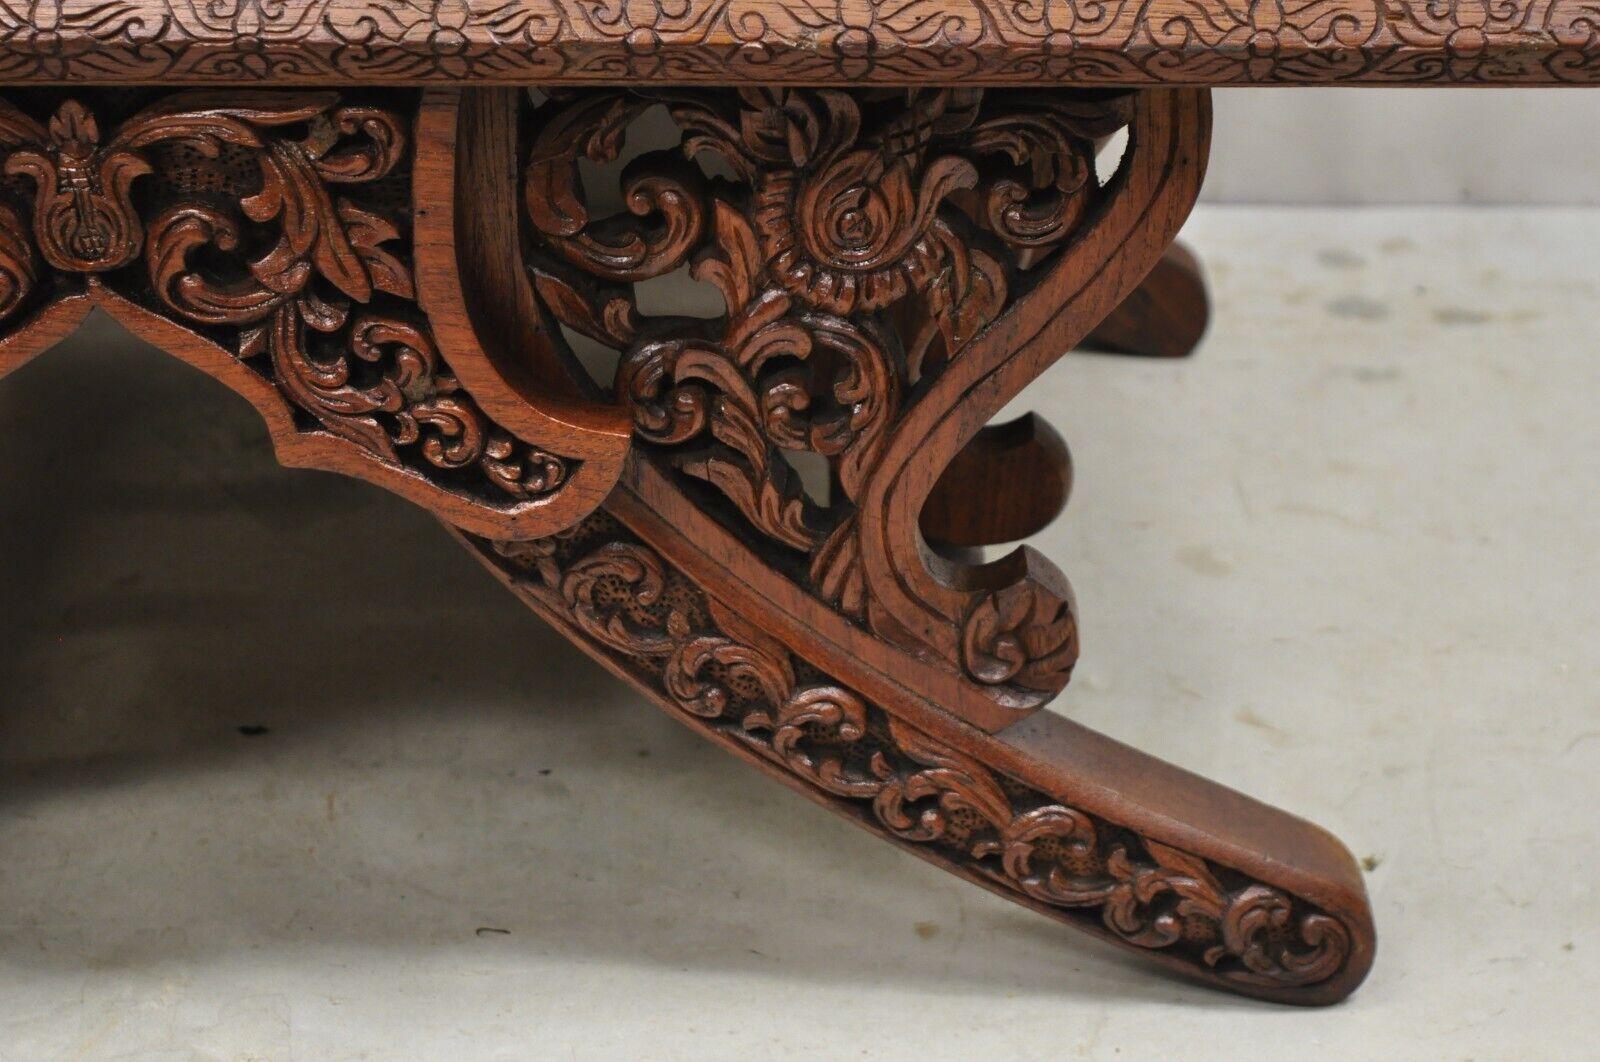 Vintage Chinoiserie Carved Teak Wood Howdah Elephant Saddle Accent Chair For Sale 7